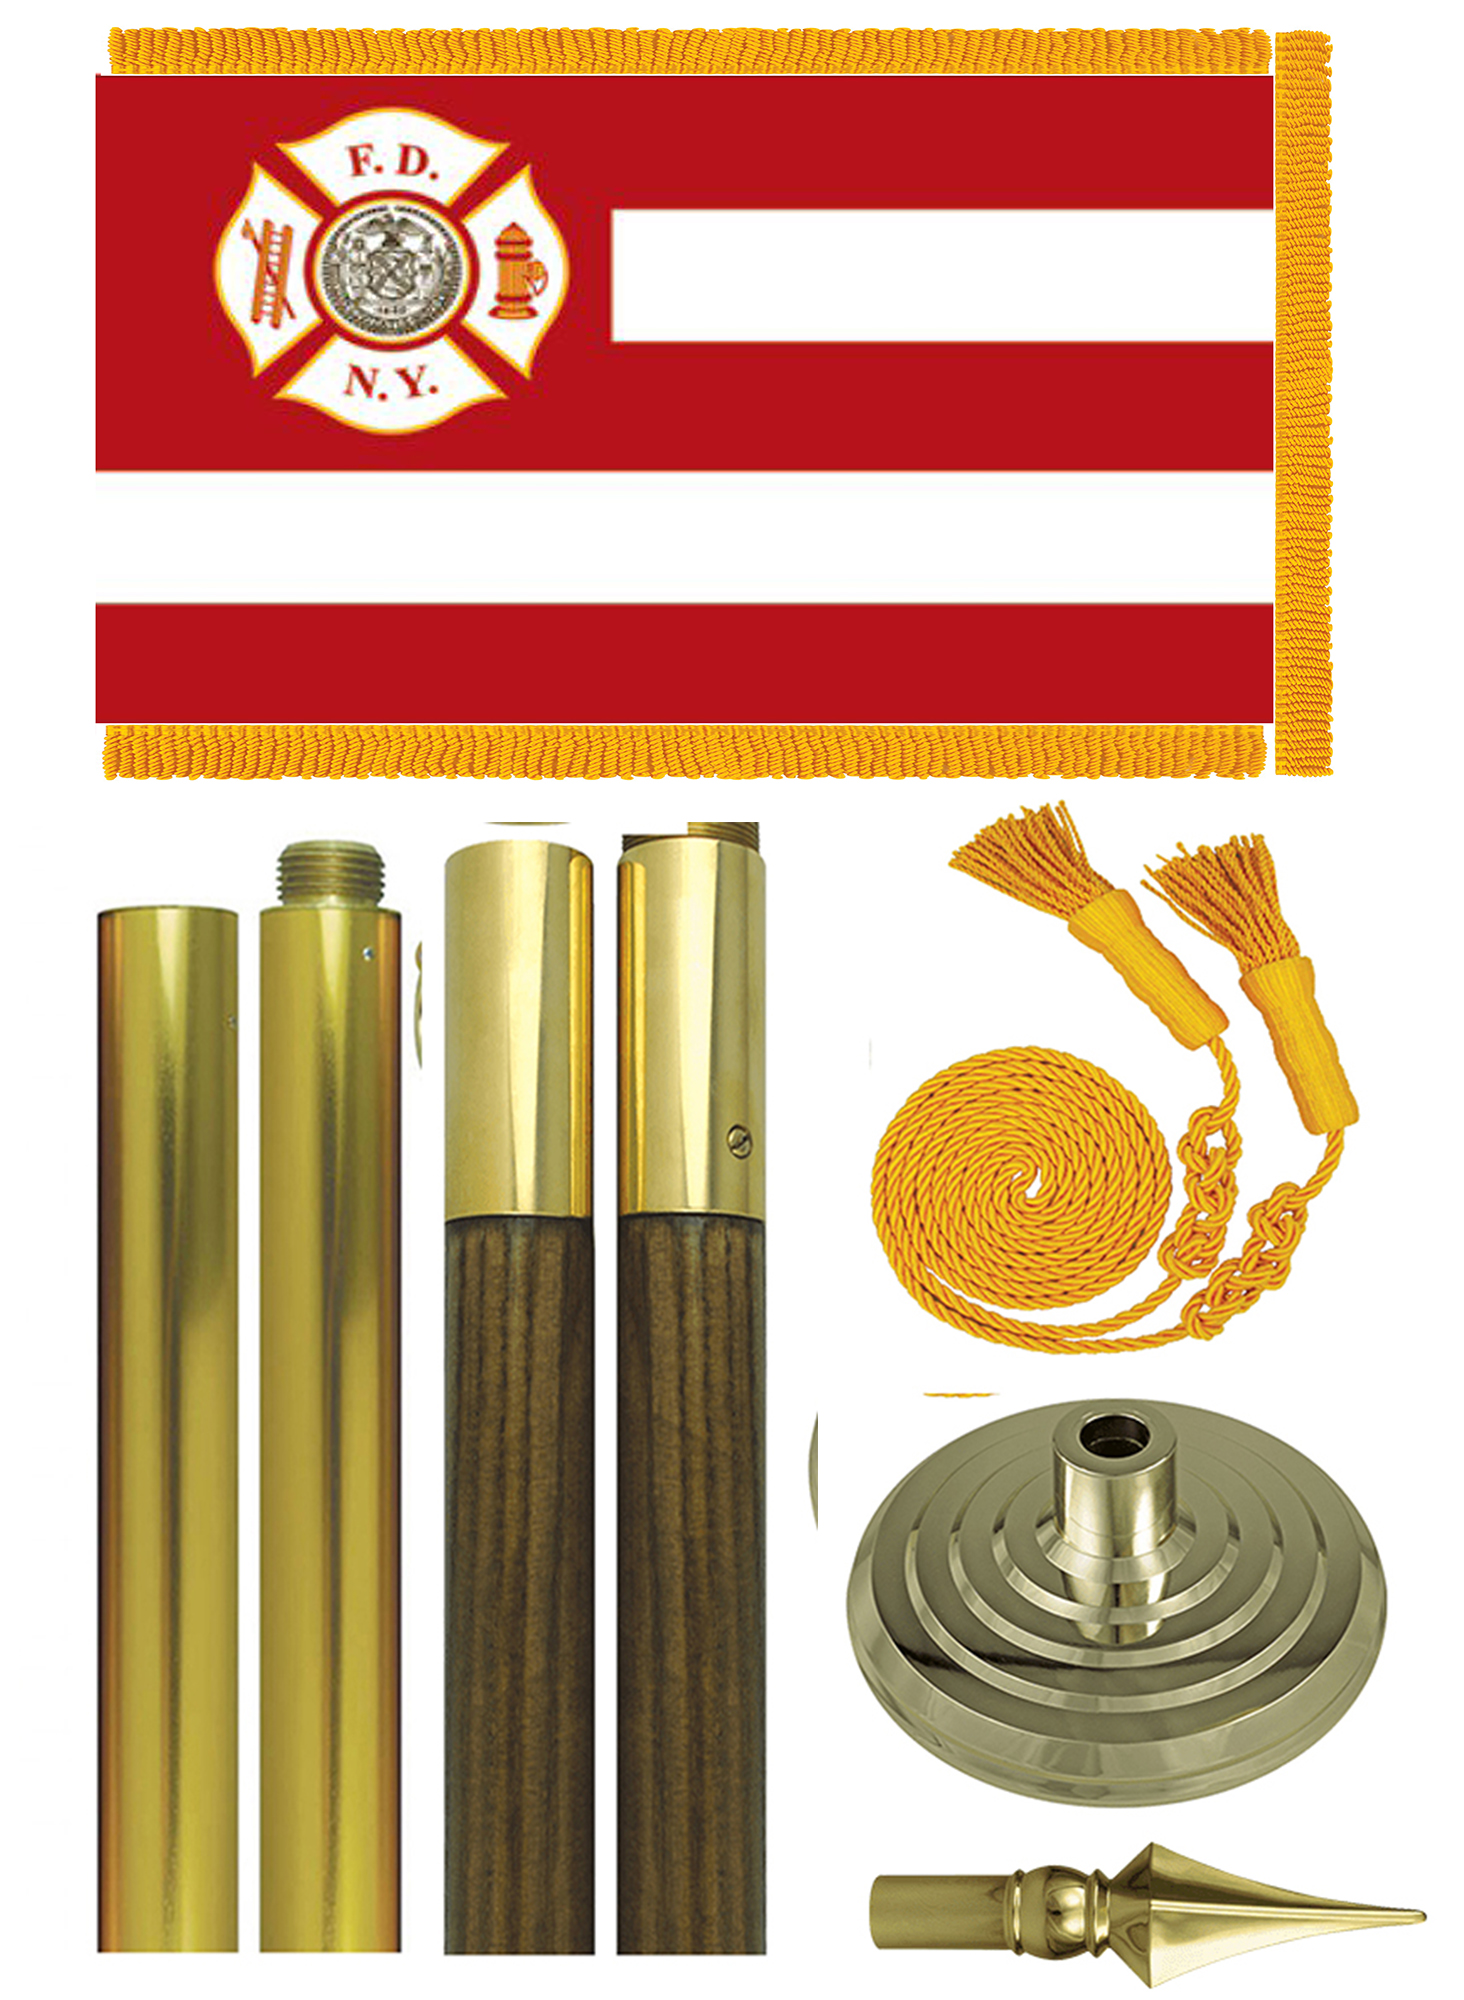 FDNY Parade Flags and Sets